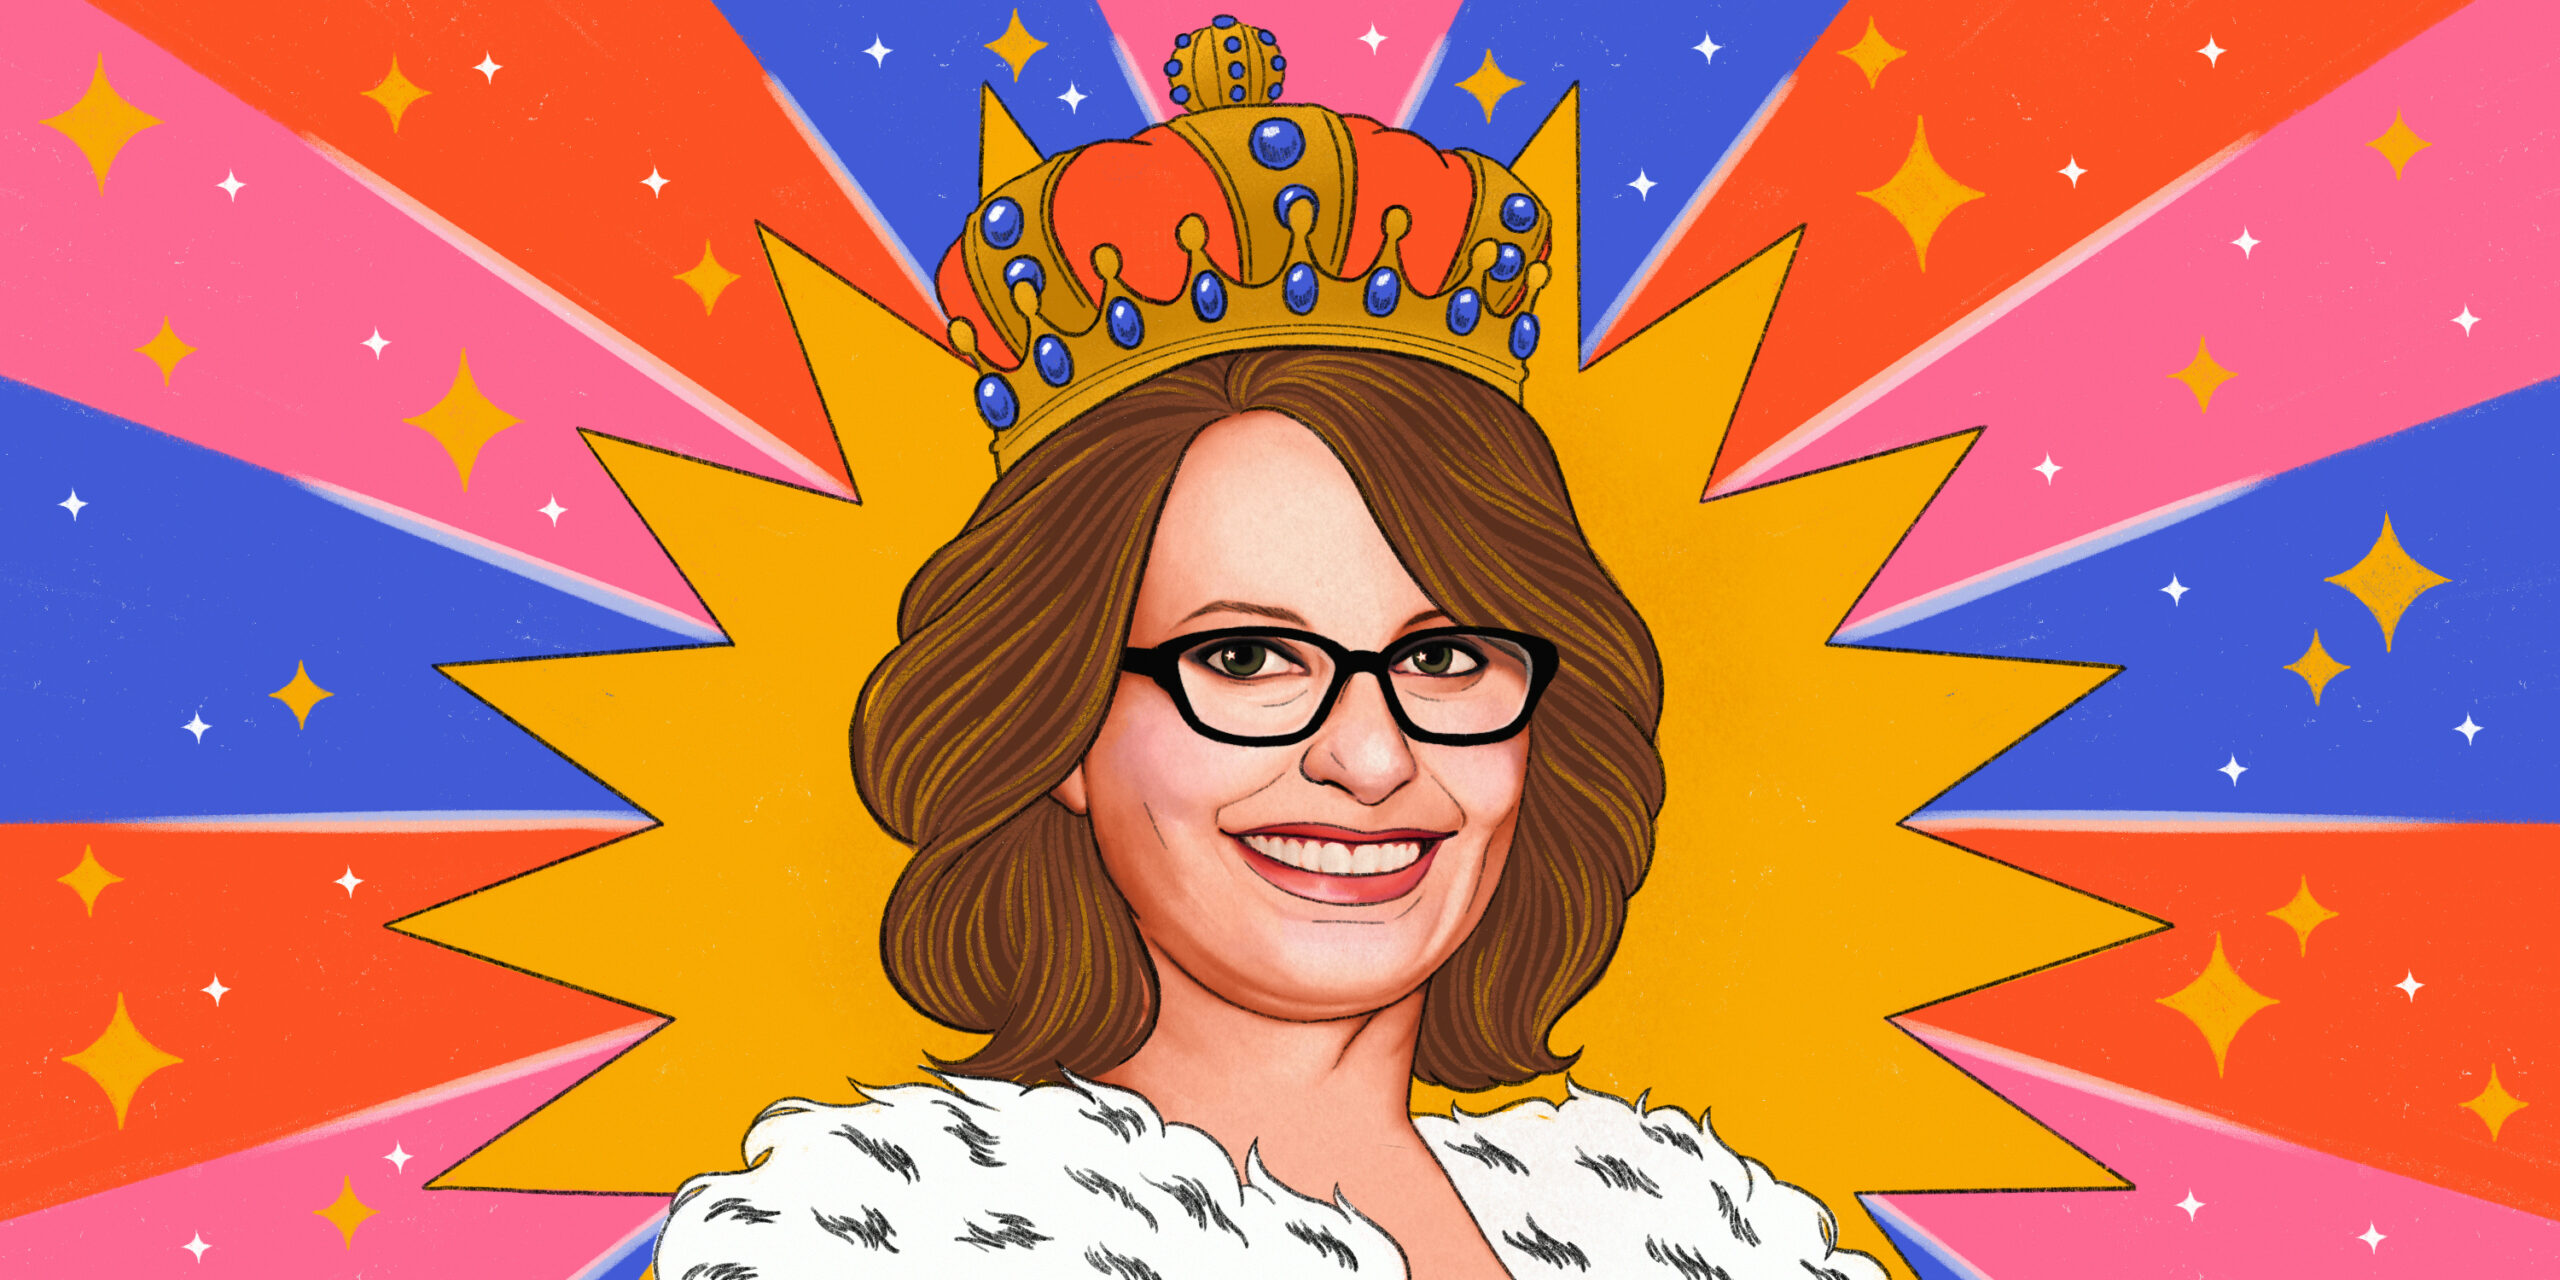 A colorful, illustrated portrait of Meg Cabot. She's smiling wide, with shoulder-length wavy brown hair. She's wearing black, rectangular glasses; has a red and gold crown on her head with blue jewels; and an ermine draped over her shoulders. Her face is framed by a mustard yellow sun-shape, and behind that, bright panels of blue, pink, and red.